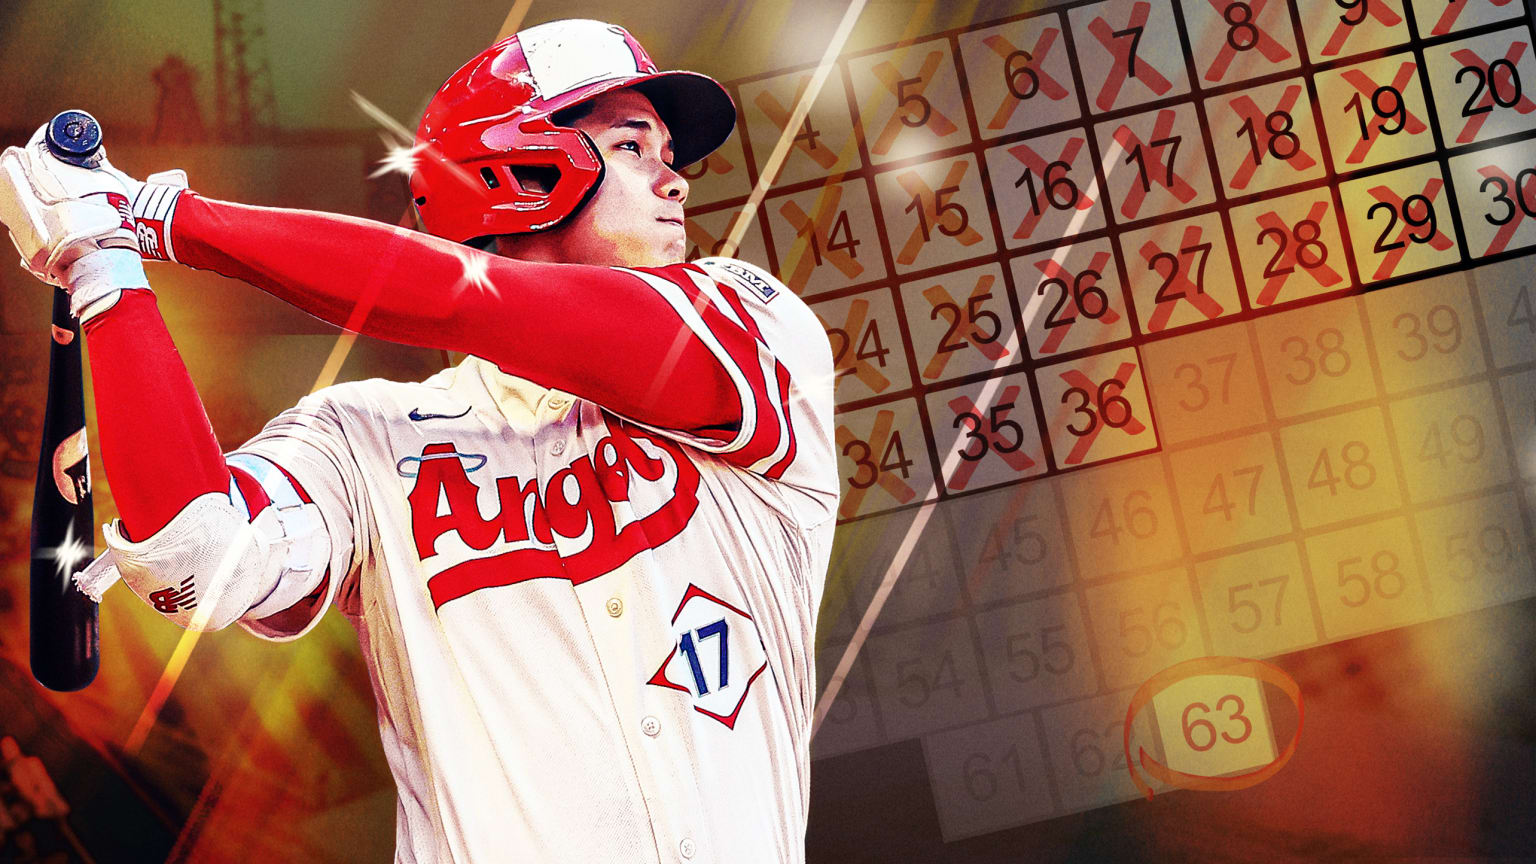 A photo illustration of Shohei Ohtani finishing a swing with a background of a grid counting up to 63